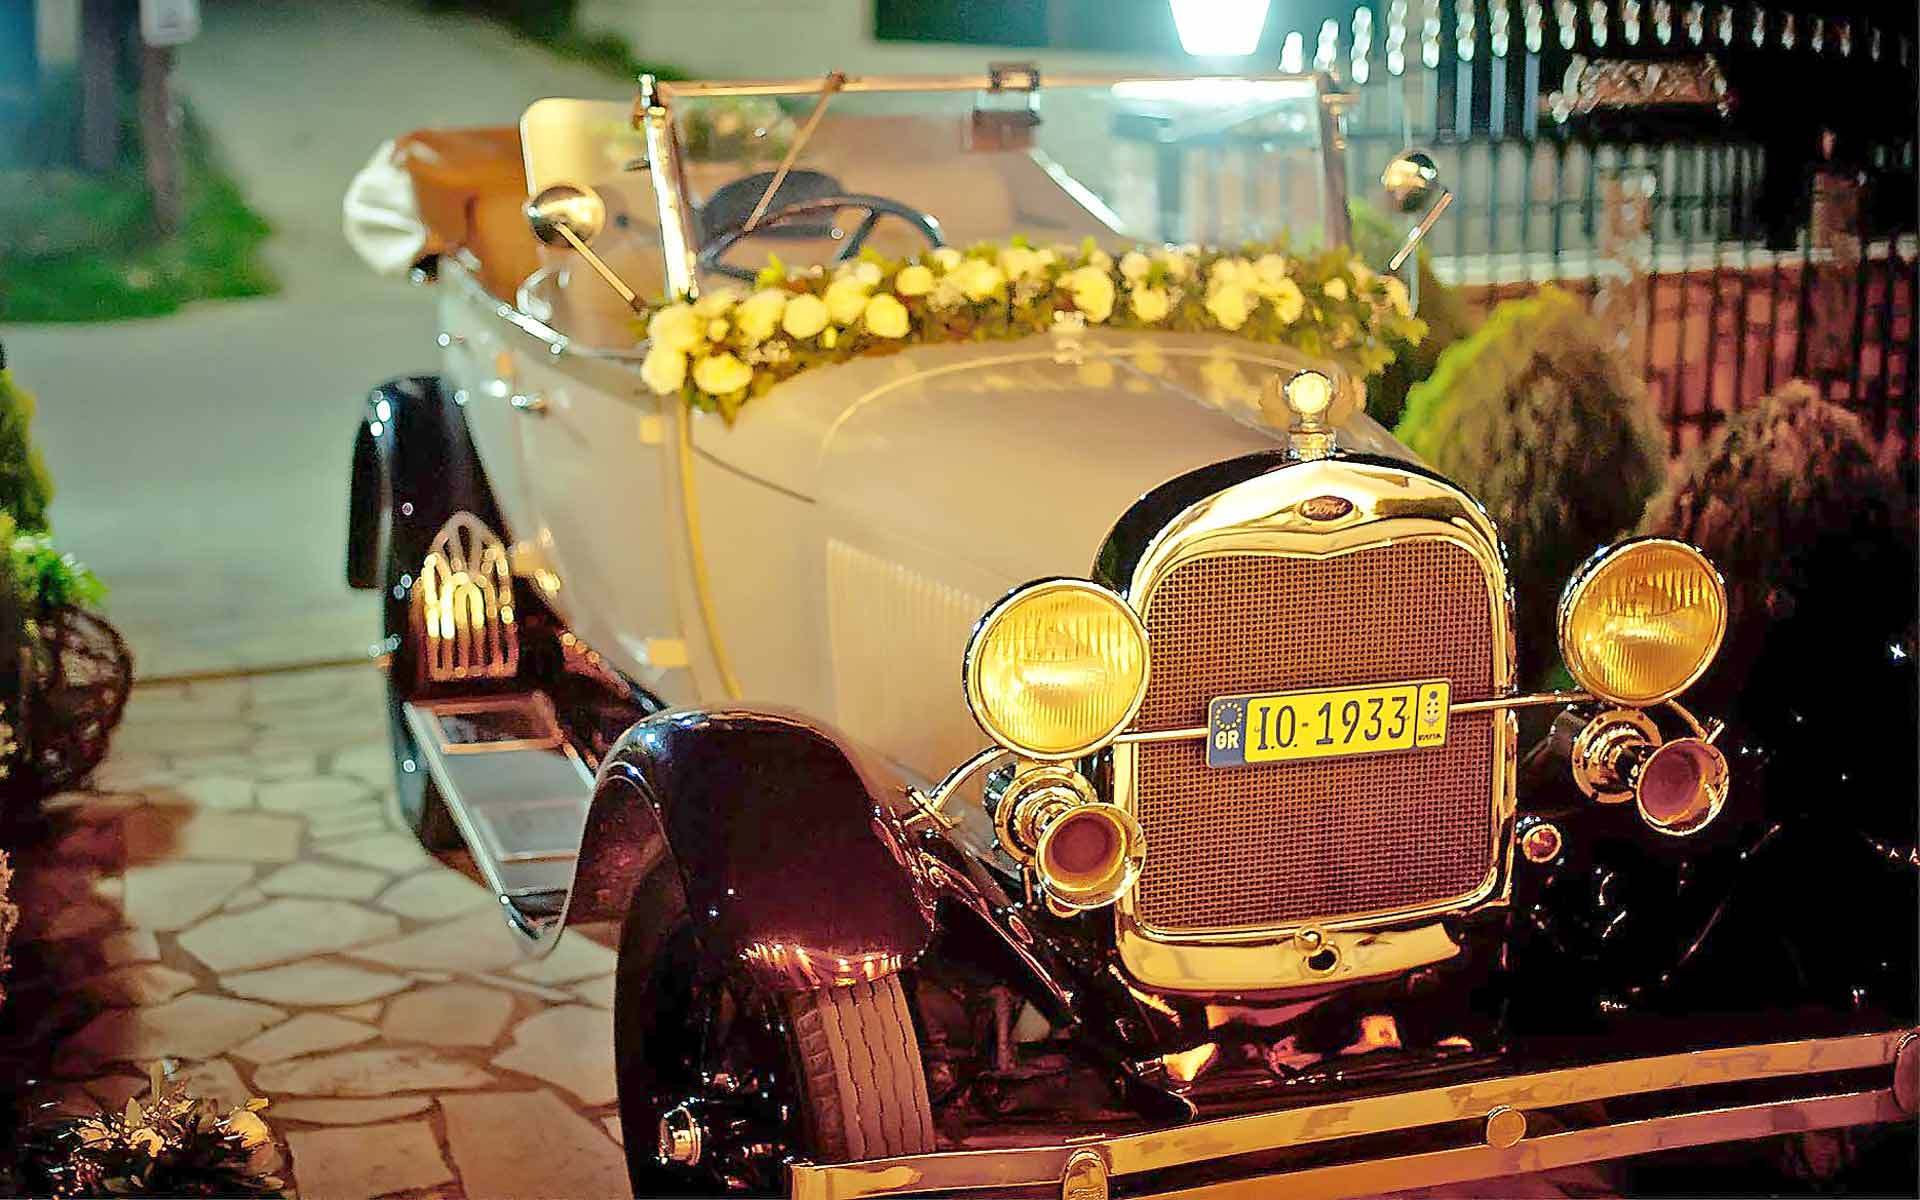 An-Amazing-Antique-Cars-For-Your-Wedding-Is-This-1956-Ford-Convertible